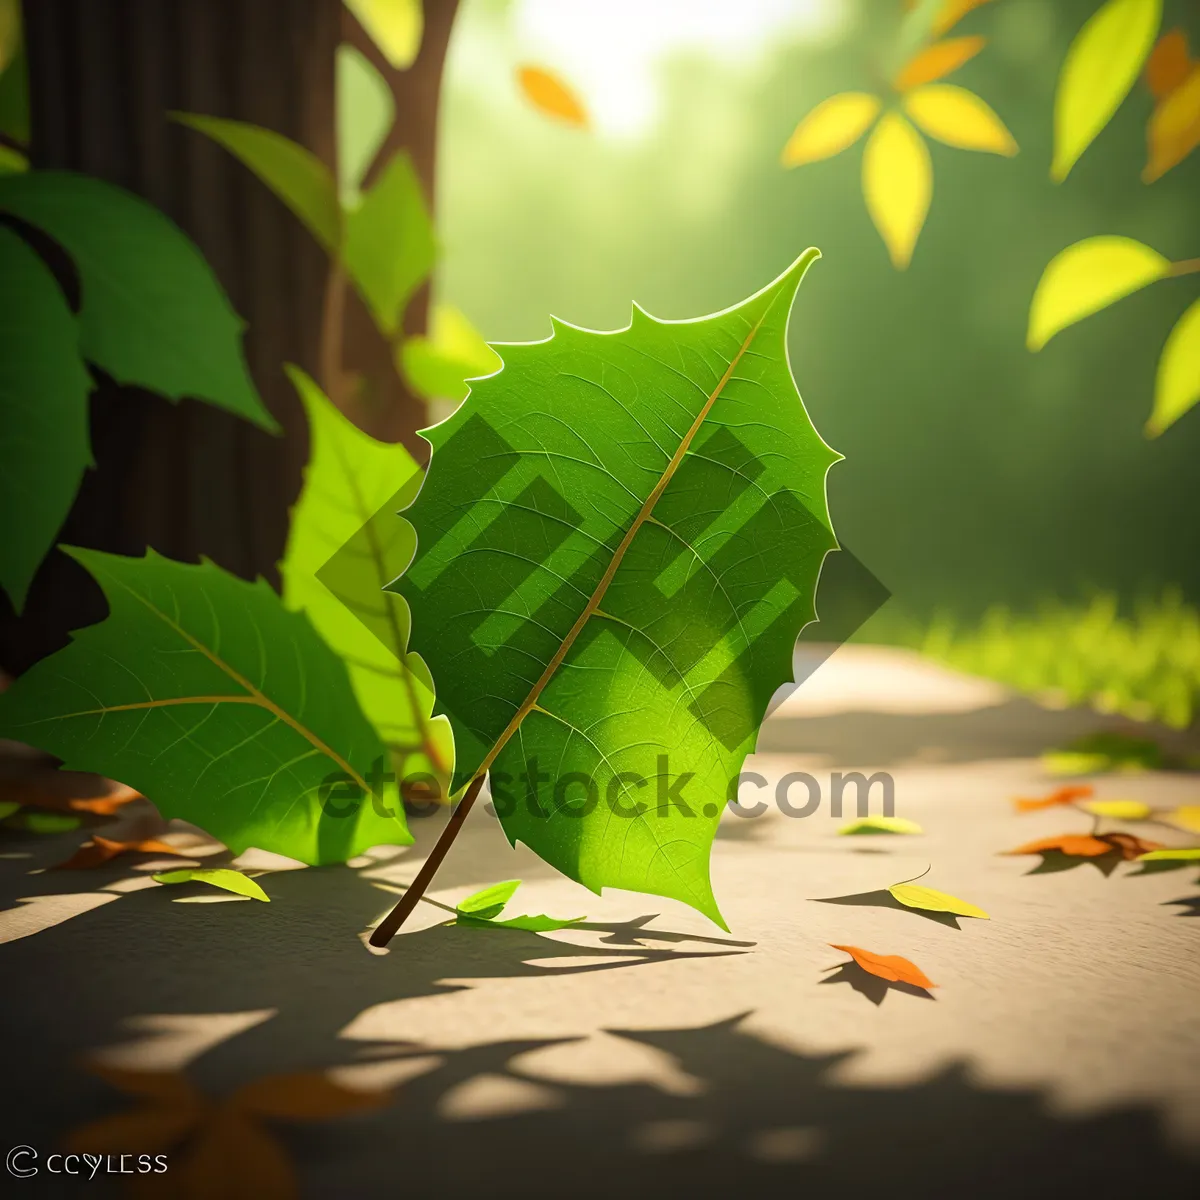 Picture of Vibrant Summer Foliage under Sunlight